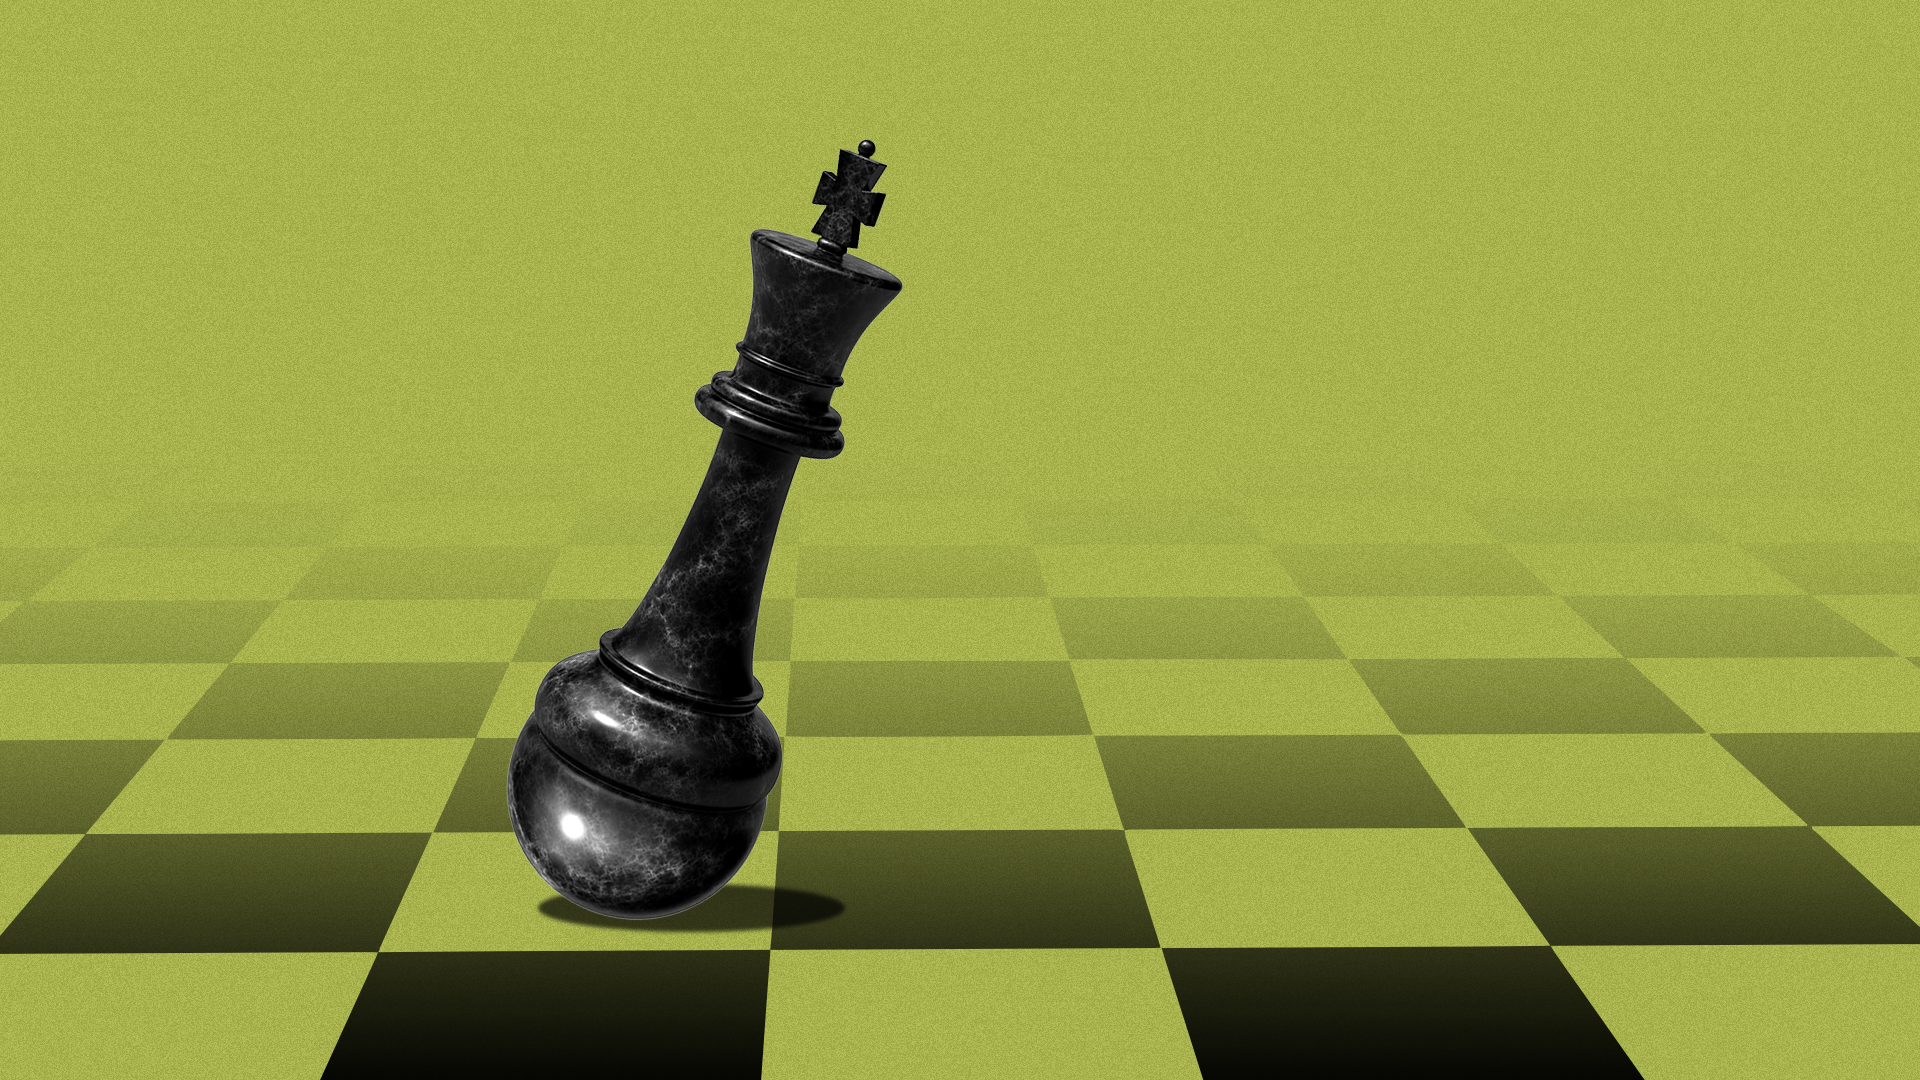 The Chess Cheating Scandal, Explained